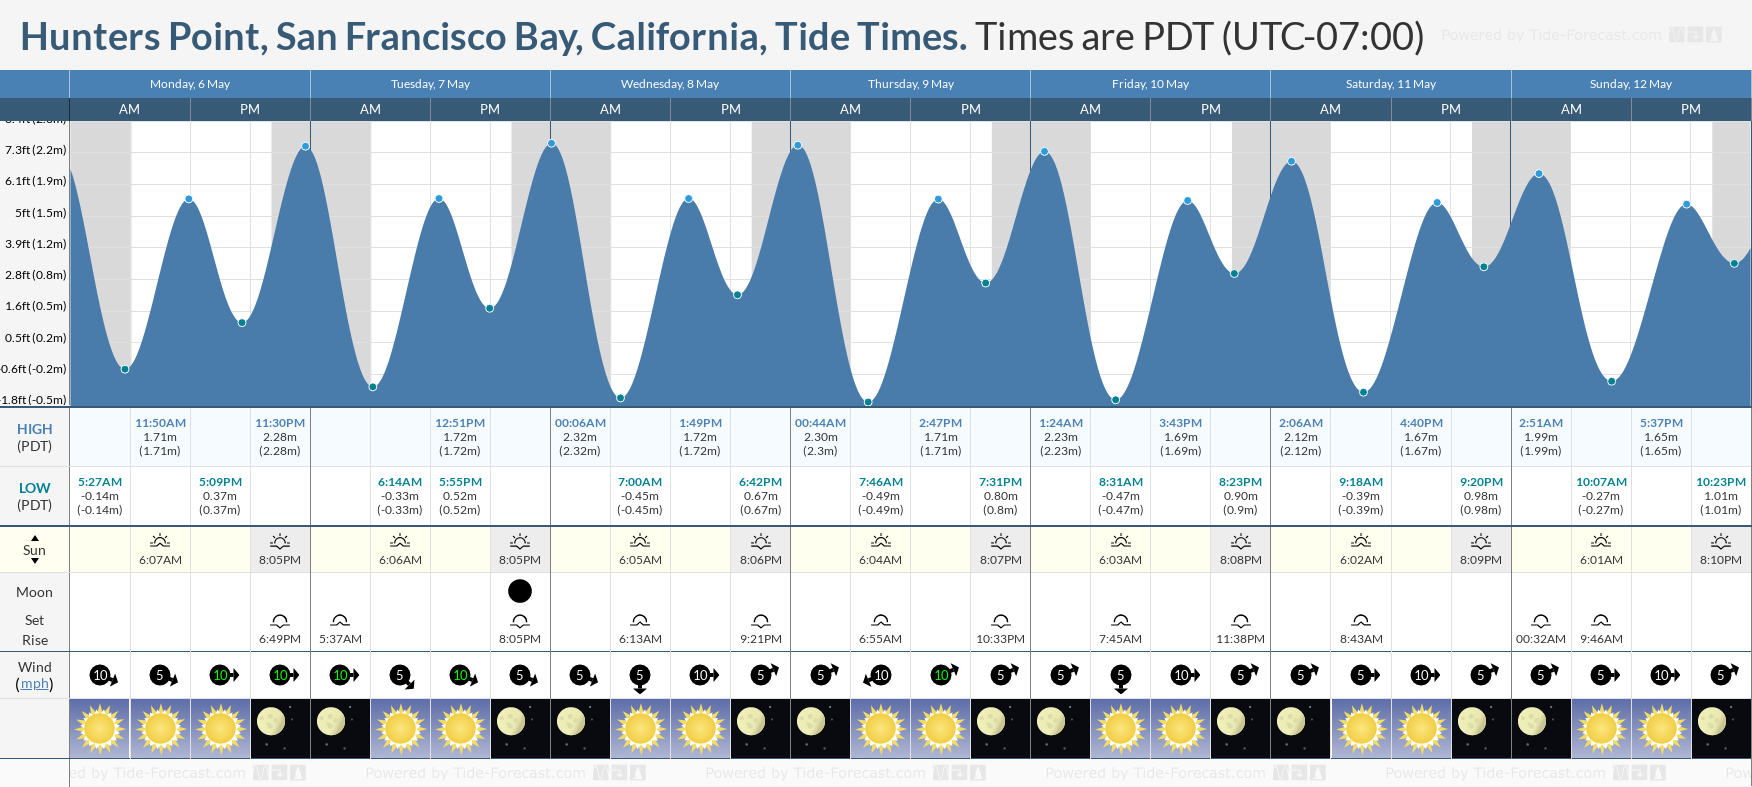 Hunters Point, San Francisco Bay, California Tide Chart including high and low tide tide times for the next 7 days